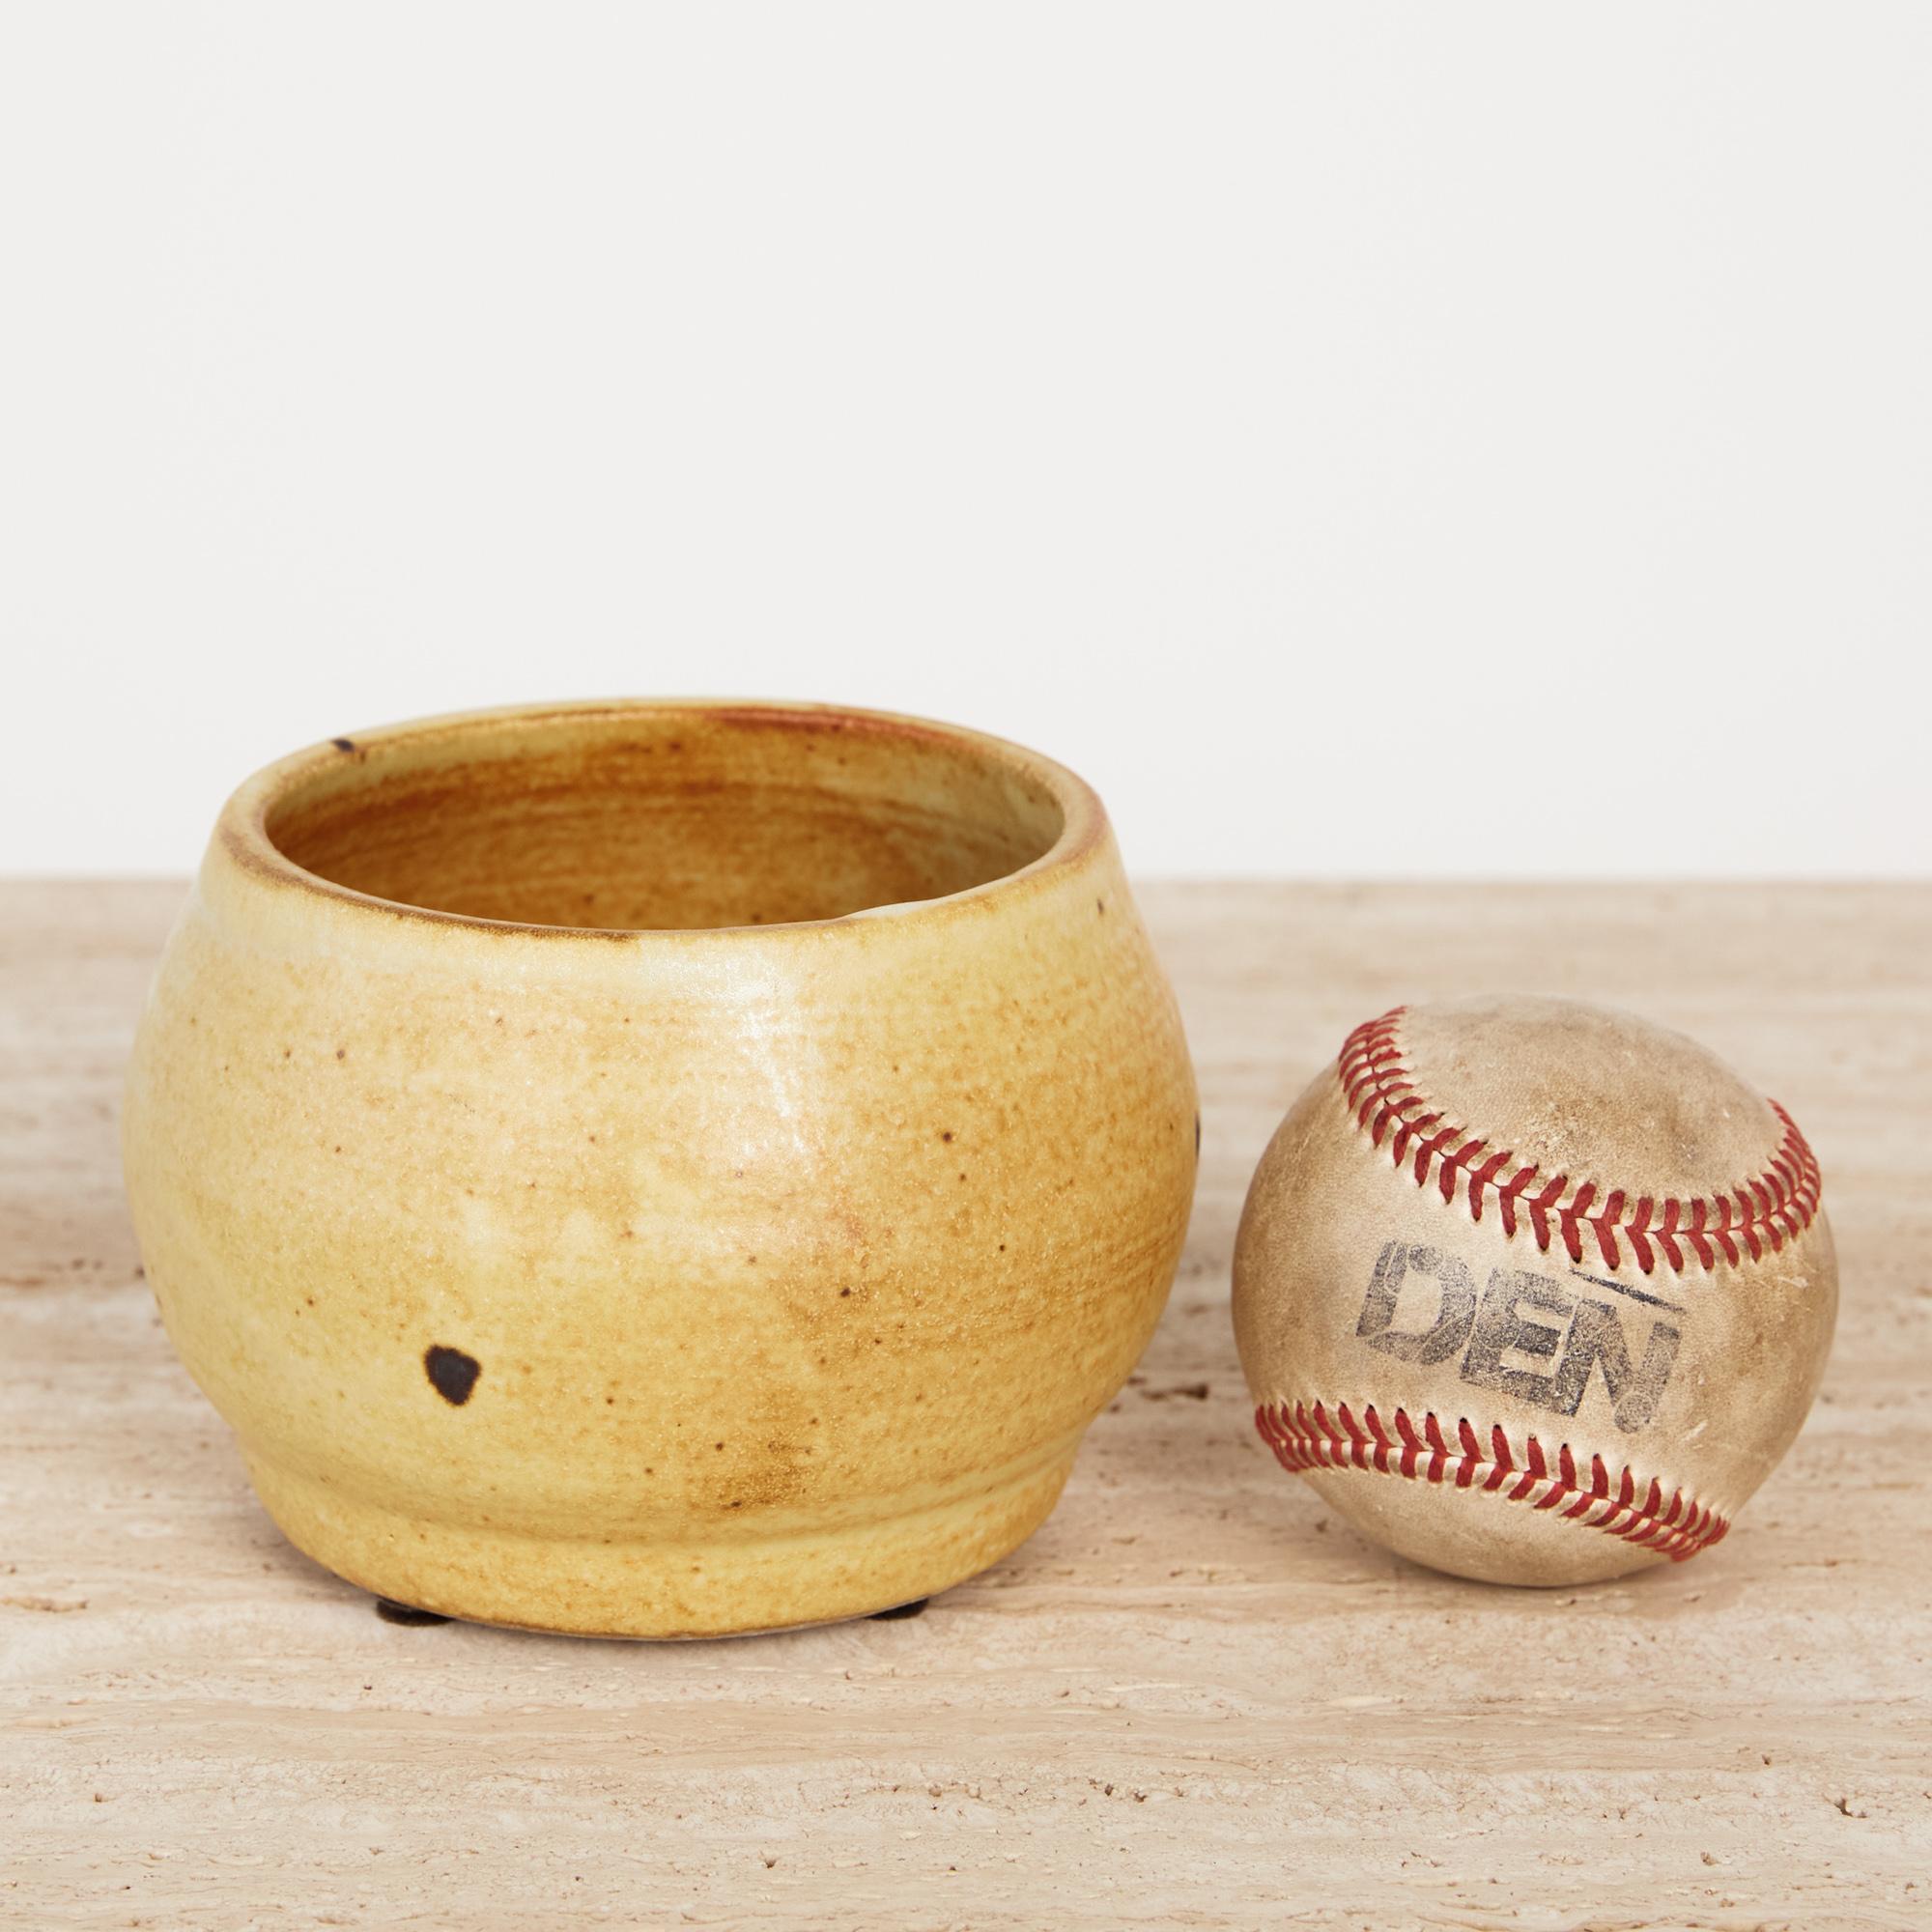 Golden yellow small ceramic vessel. Rounded form with handsome variation in tone and soft speckle. Slight grooves along the sides are remnants of the artist’s tool and a slight drip of the glaze highlights the handmade character.

Dimensions: 5.5”